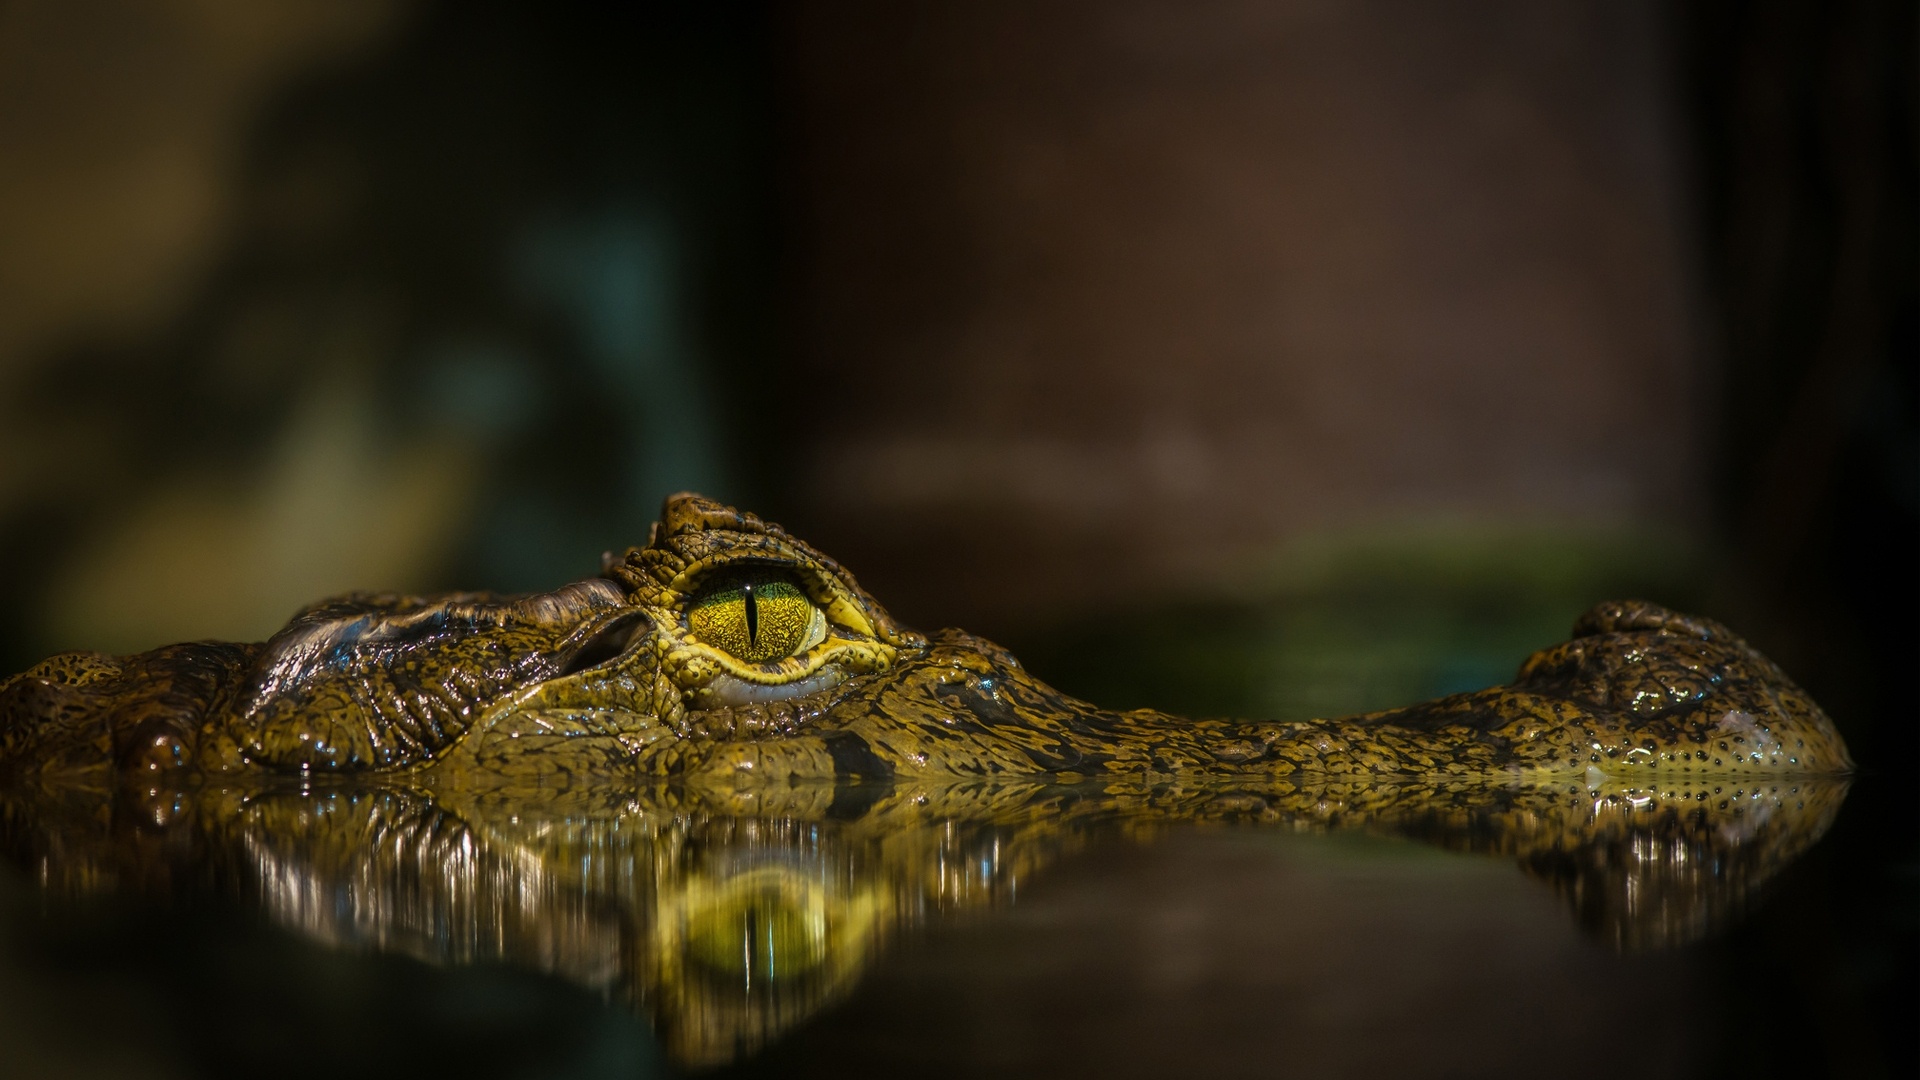 Crocodile: Members of the order Crocodilia, which also includes alligators, caimans, and gharials. 1920x1080 Full HD Wallpaper.